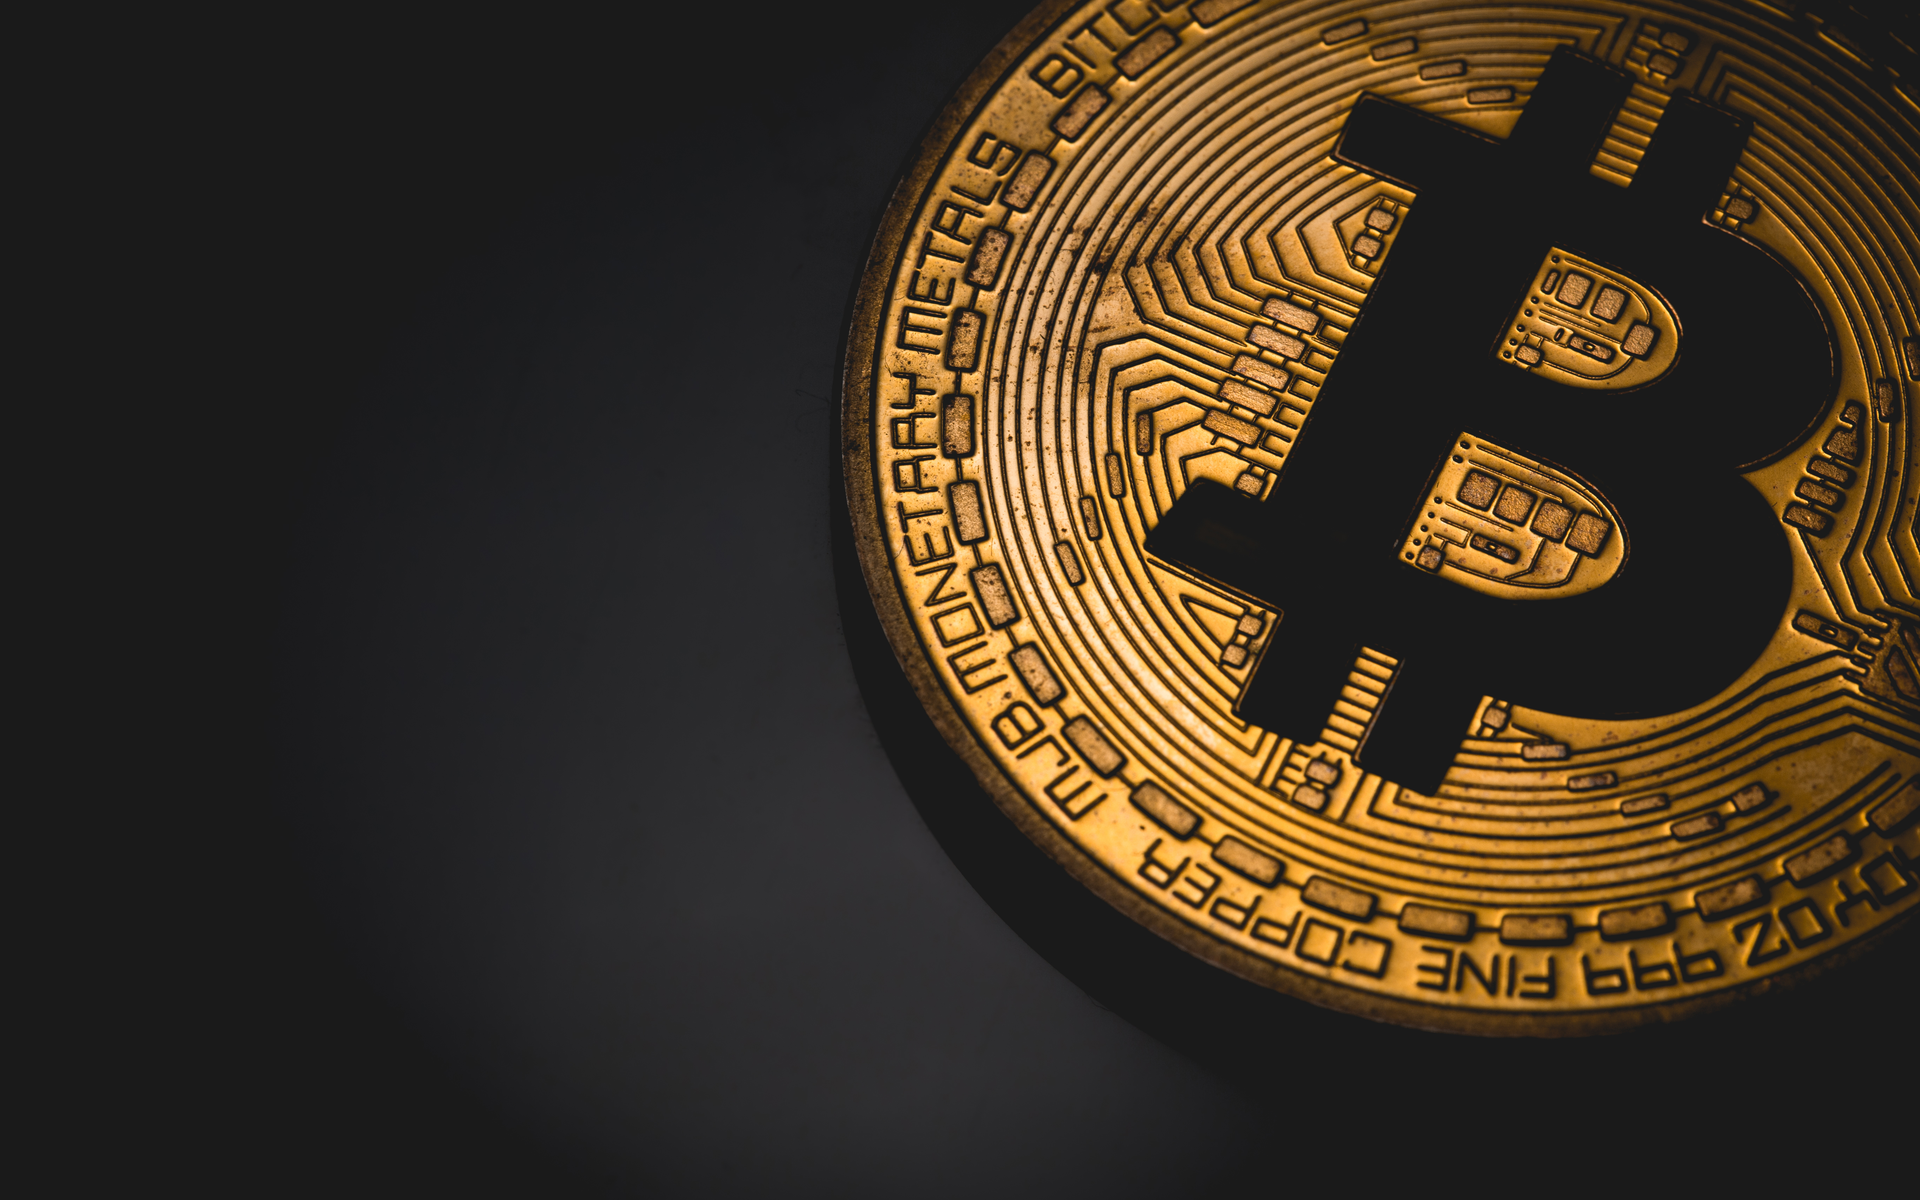 These 3 Facts About Bitcoin Will Make You Stop and Think